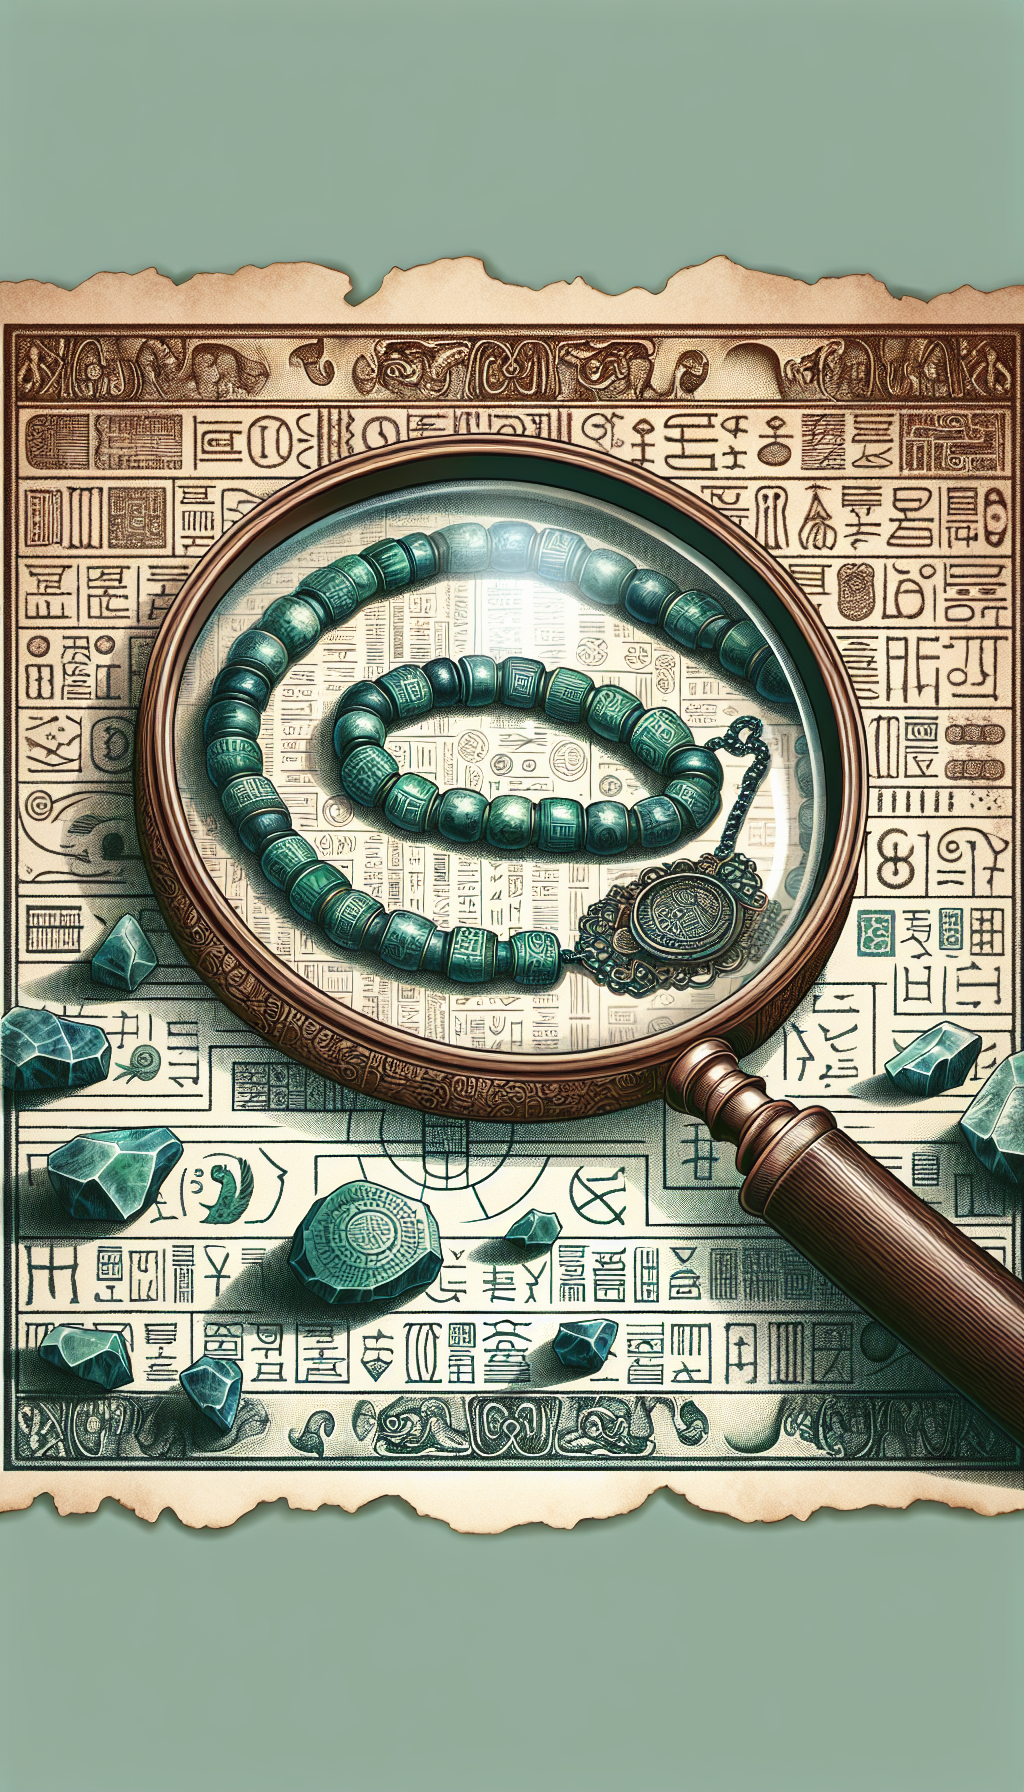 An illustration depicts an antique magnifying glass hovering over a detailed ancient jade necklace, revealing hidden patterns, hallmarks, and age-related characteristics. The glass splits the scene into two distinct art styles: photorealistic under the lens, symbolizing careful appraisal, and a stylized, almost hieroglyphic background that conveys the enigmatic history of the jewelry.